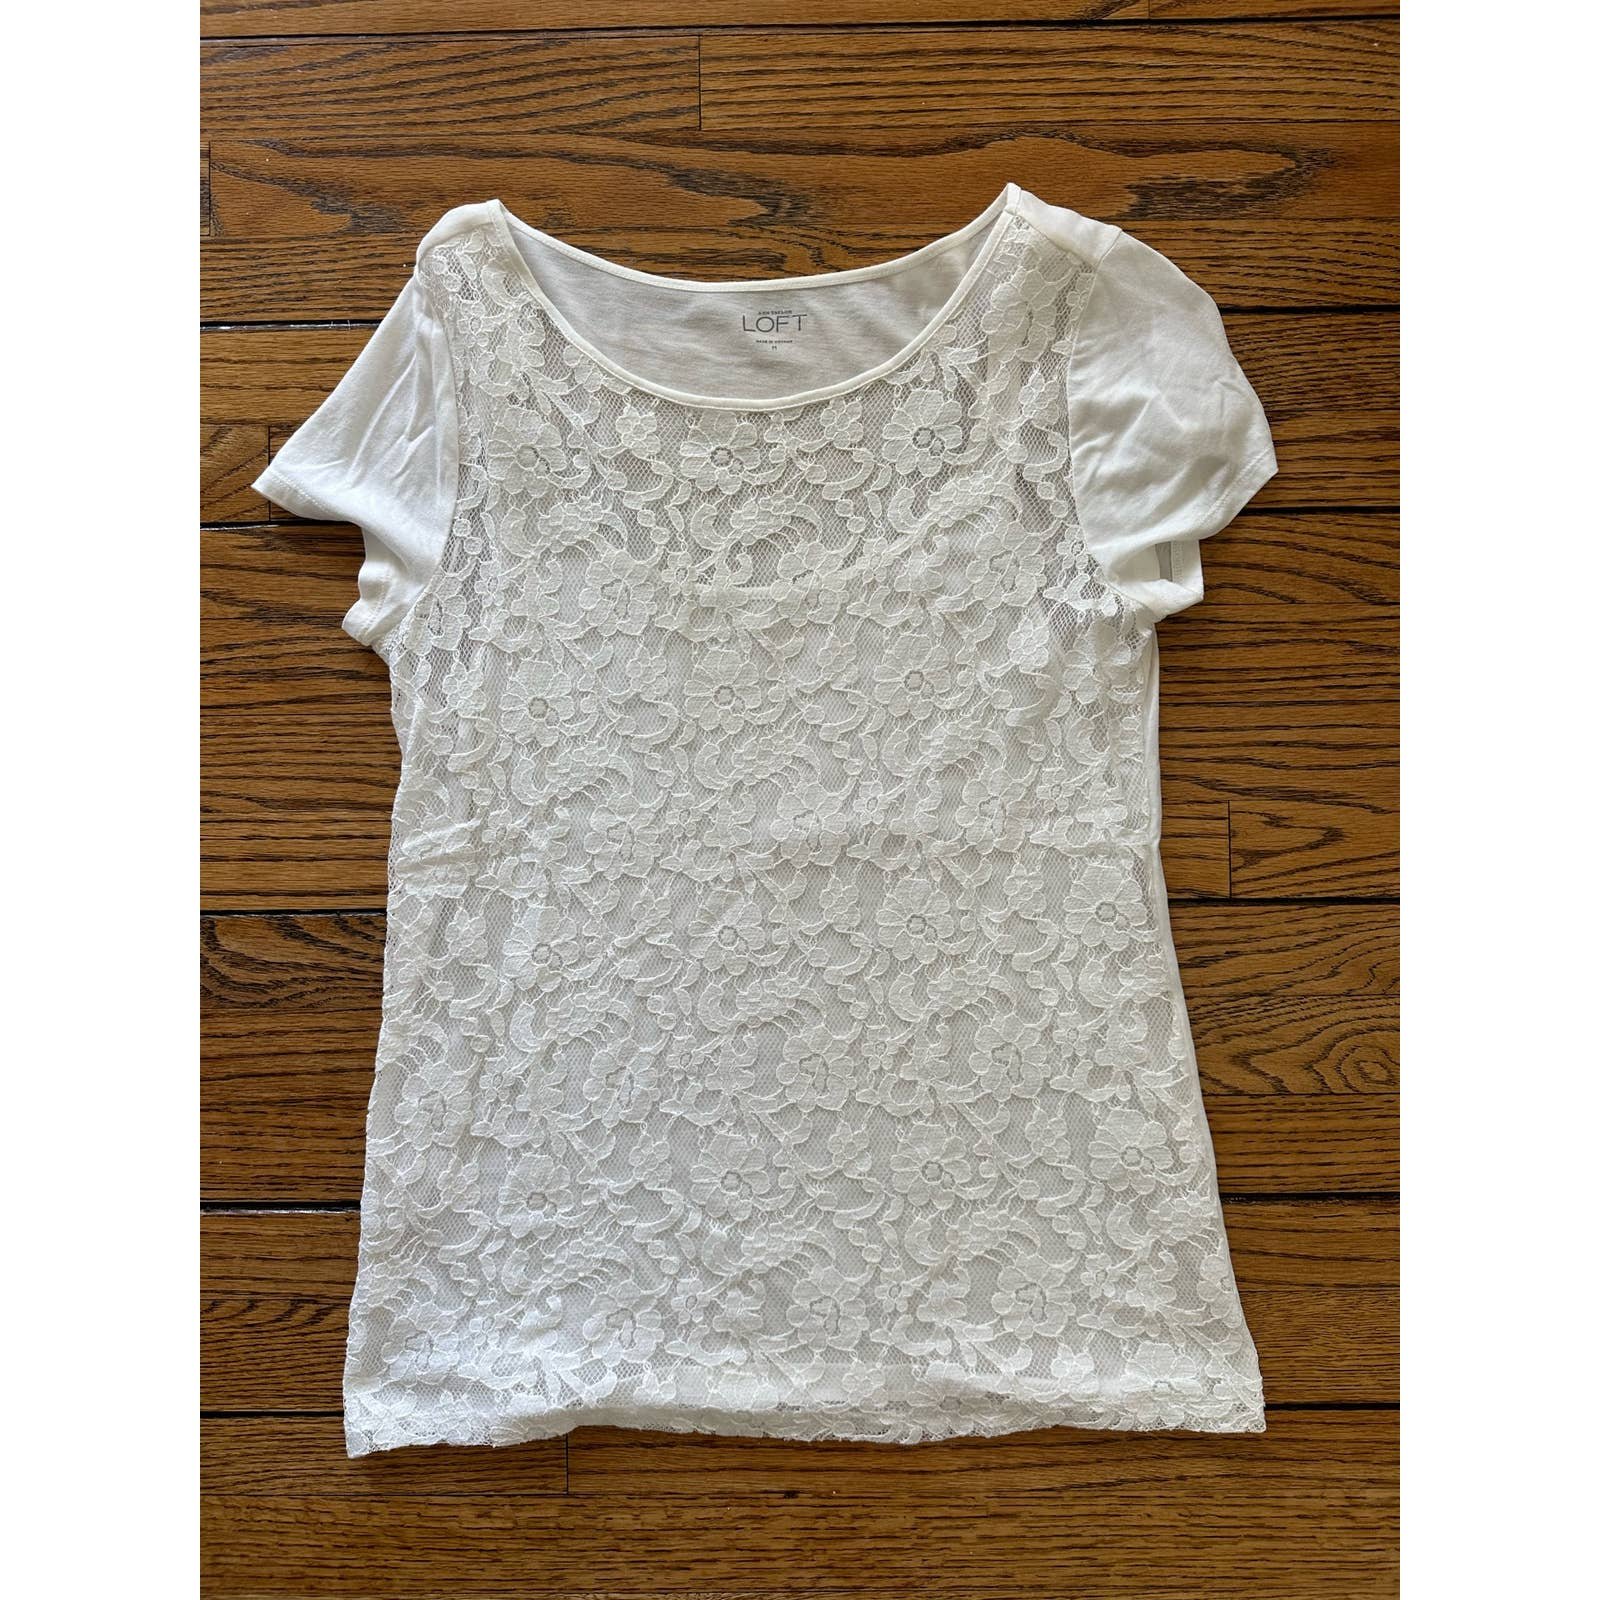 Nice Loft White Tee with Lace Size M gZd6Z3caf Factory 